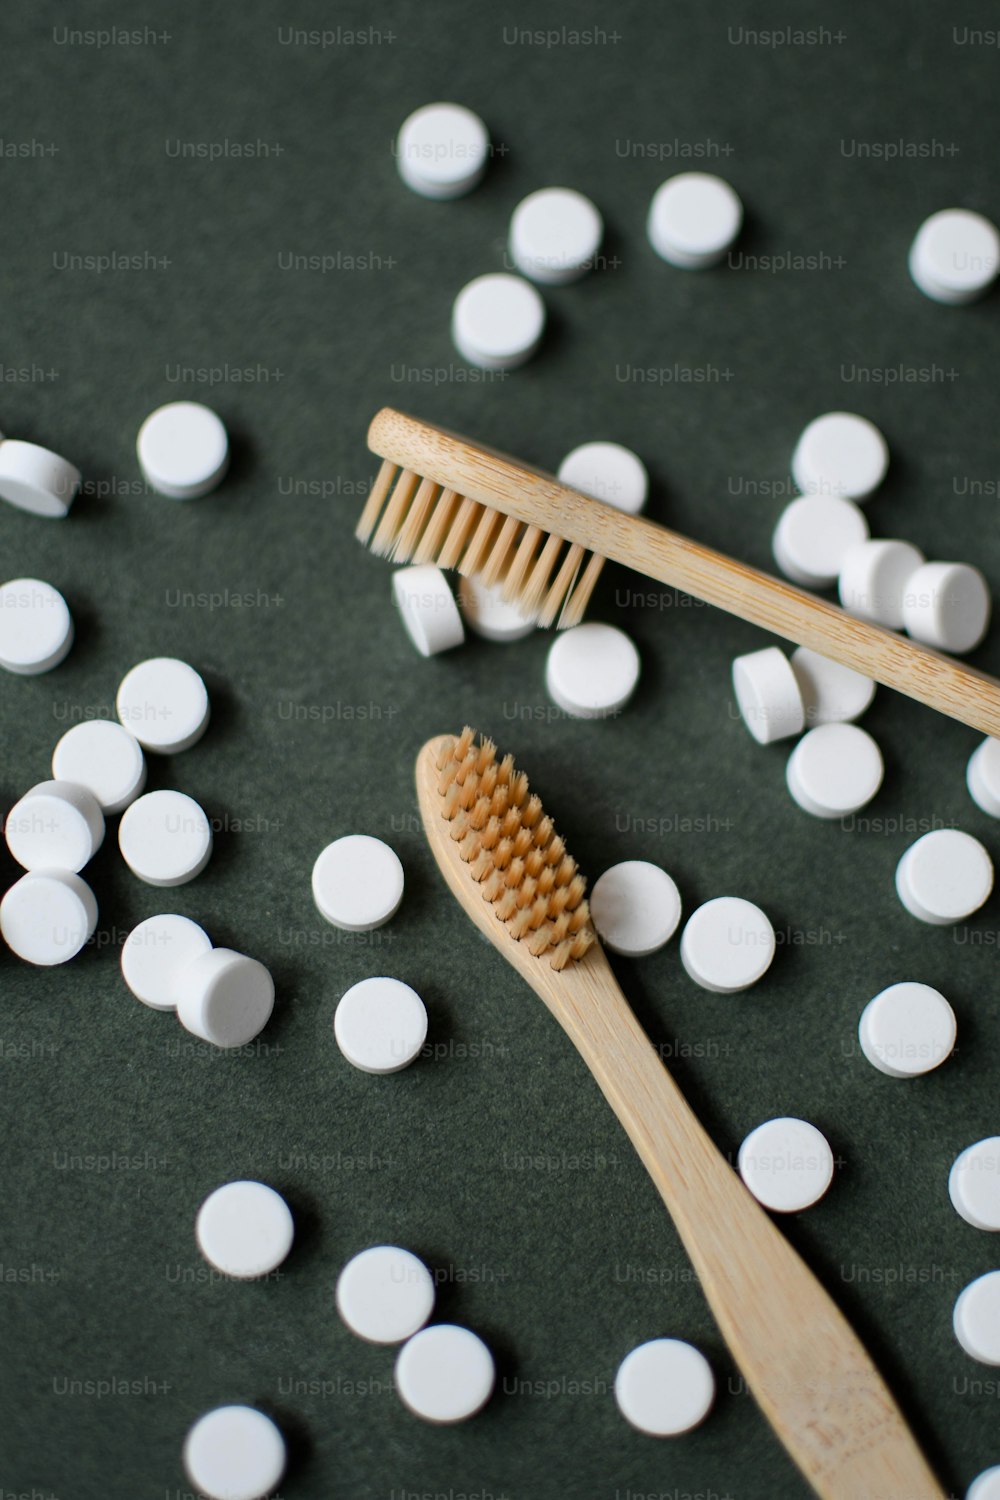 a wooden toothbrush sitting on top of a pile of white pills